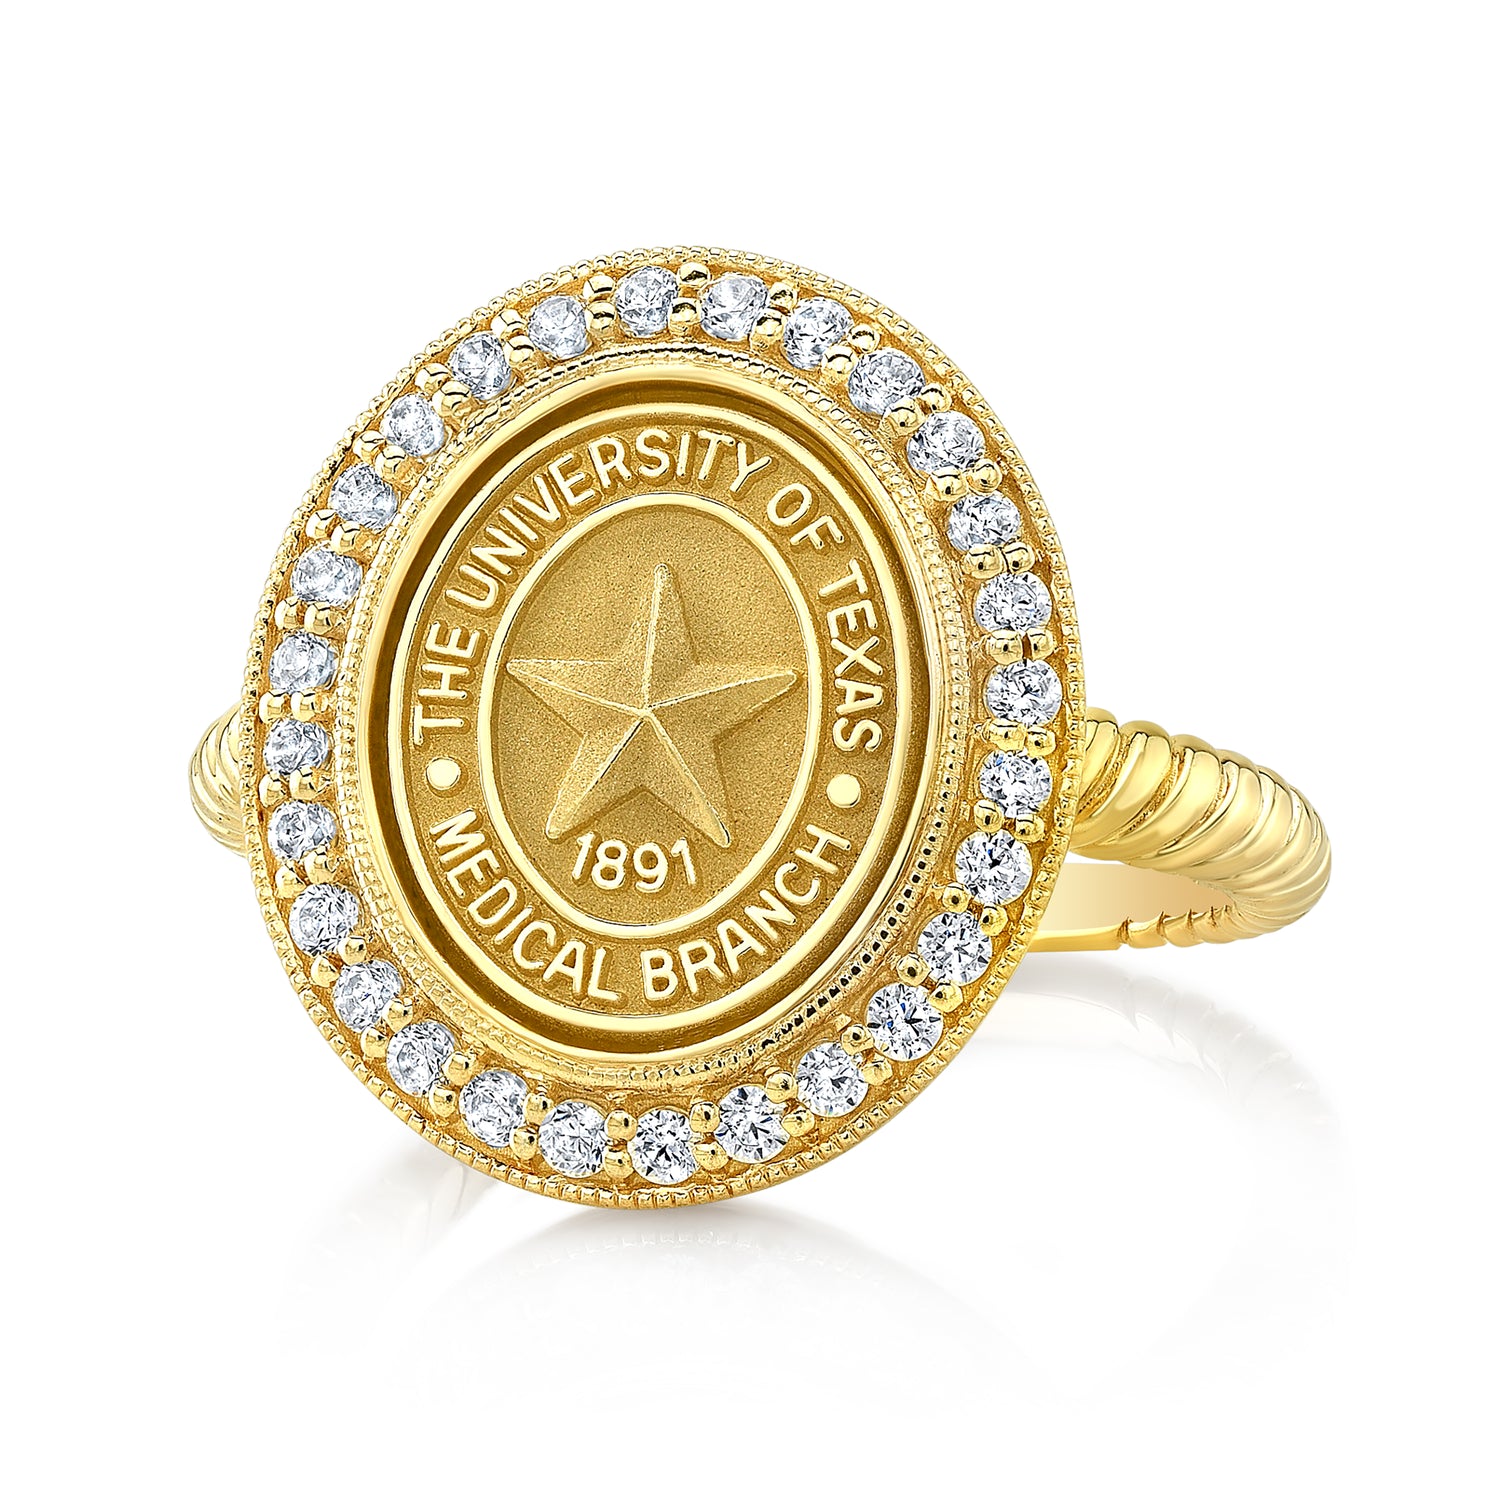 the Pursuit 234 university collection ring by San Jose Jewelers in 12x10 mm.